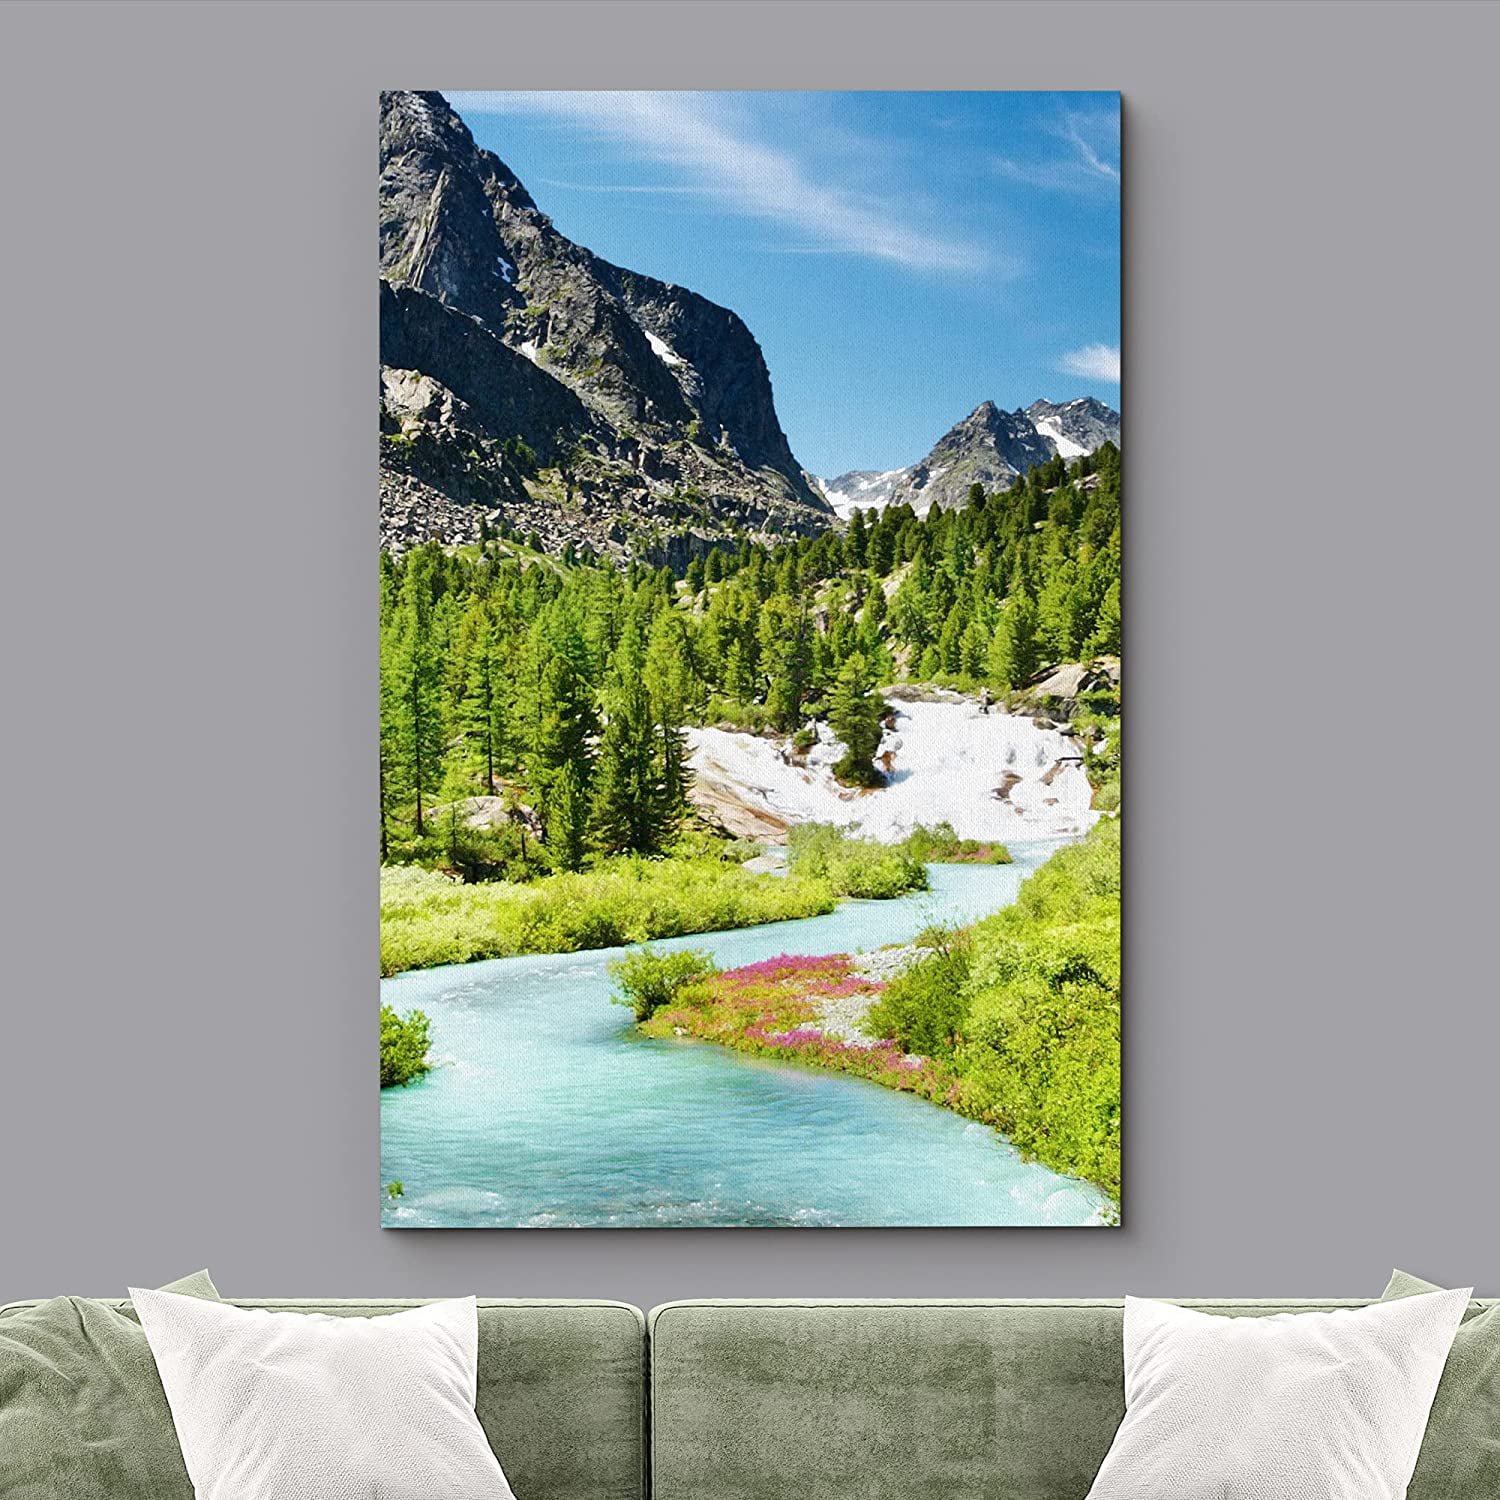 wall26 Canvas Print Wall Art Scenic Mountain Range Forest Blue River Nature  Wilderness Photography Realism Decorative Landscape Relax/Calm Zen  Multicolor for Living Room, Bedroom, Office 16quot;x2